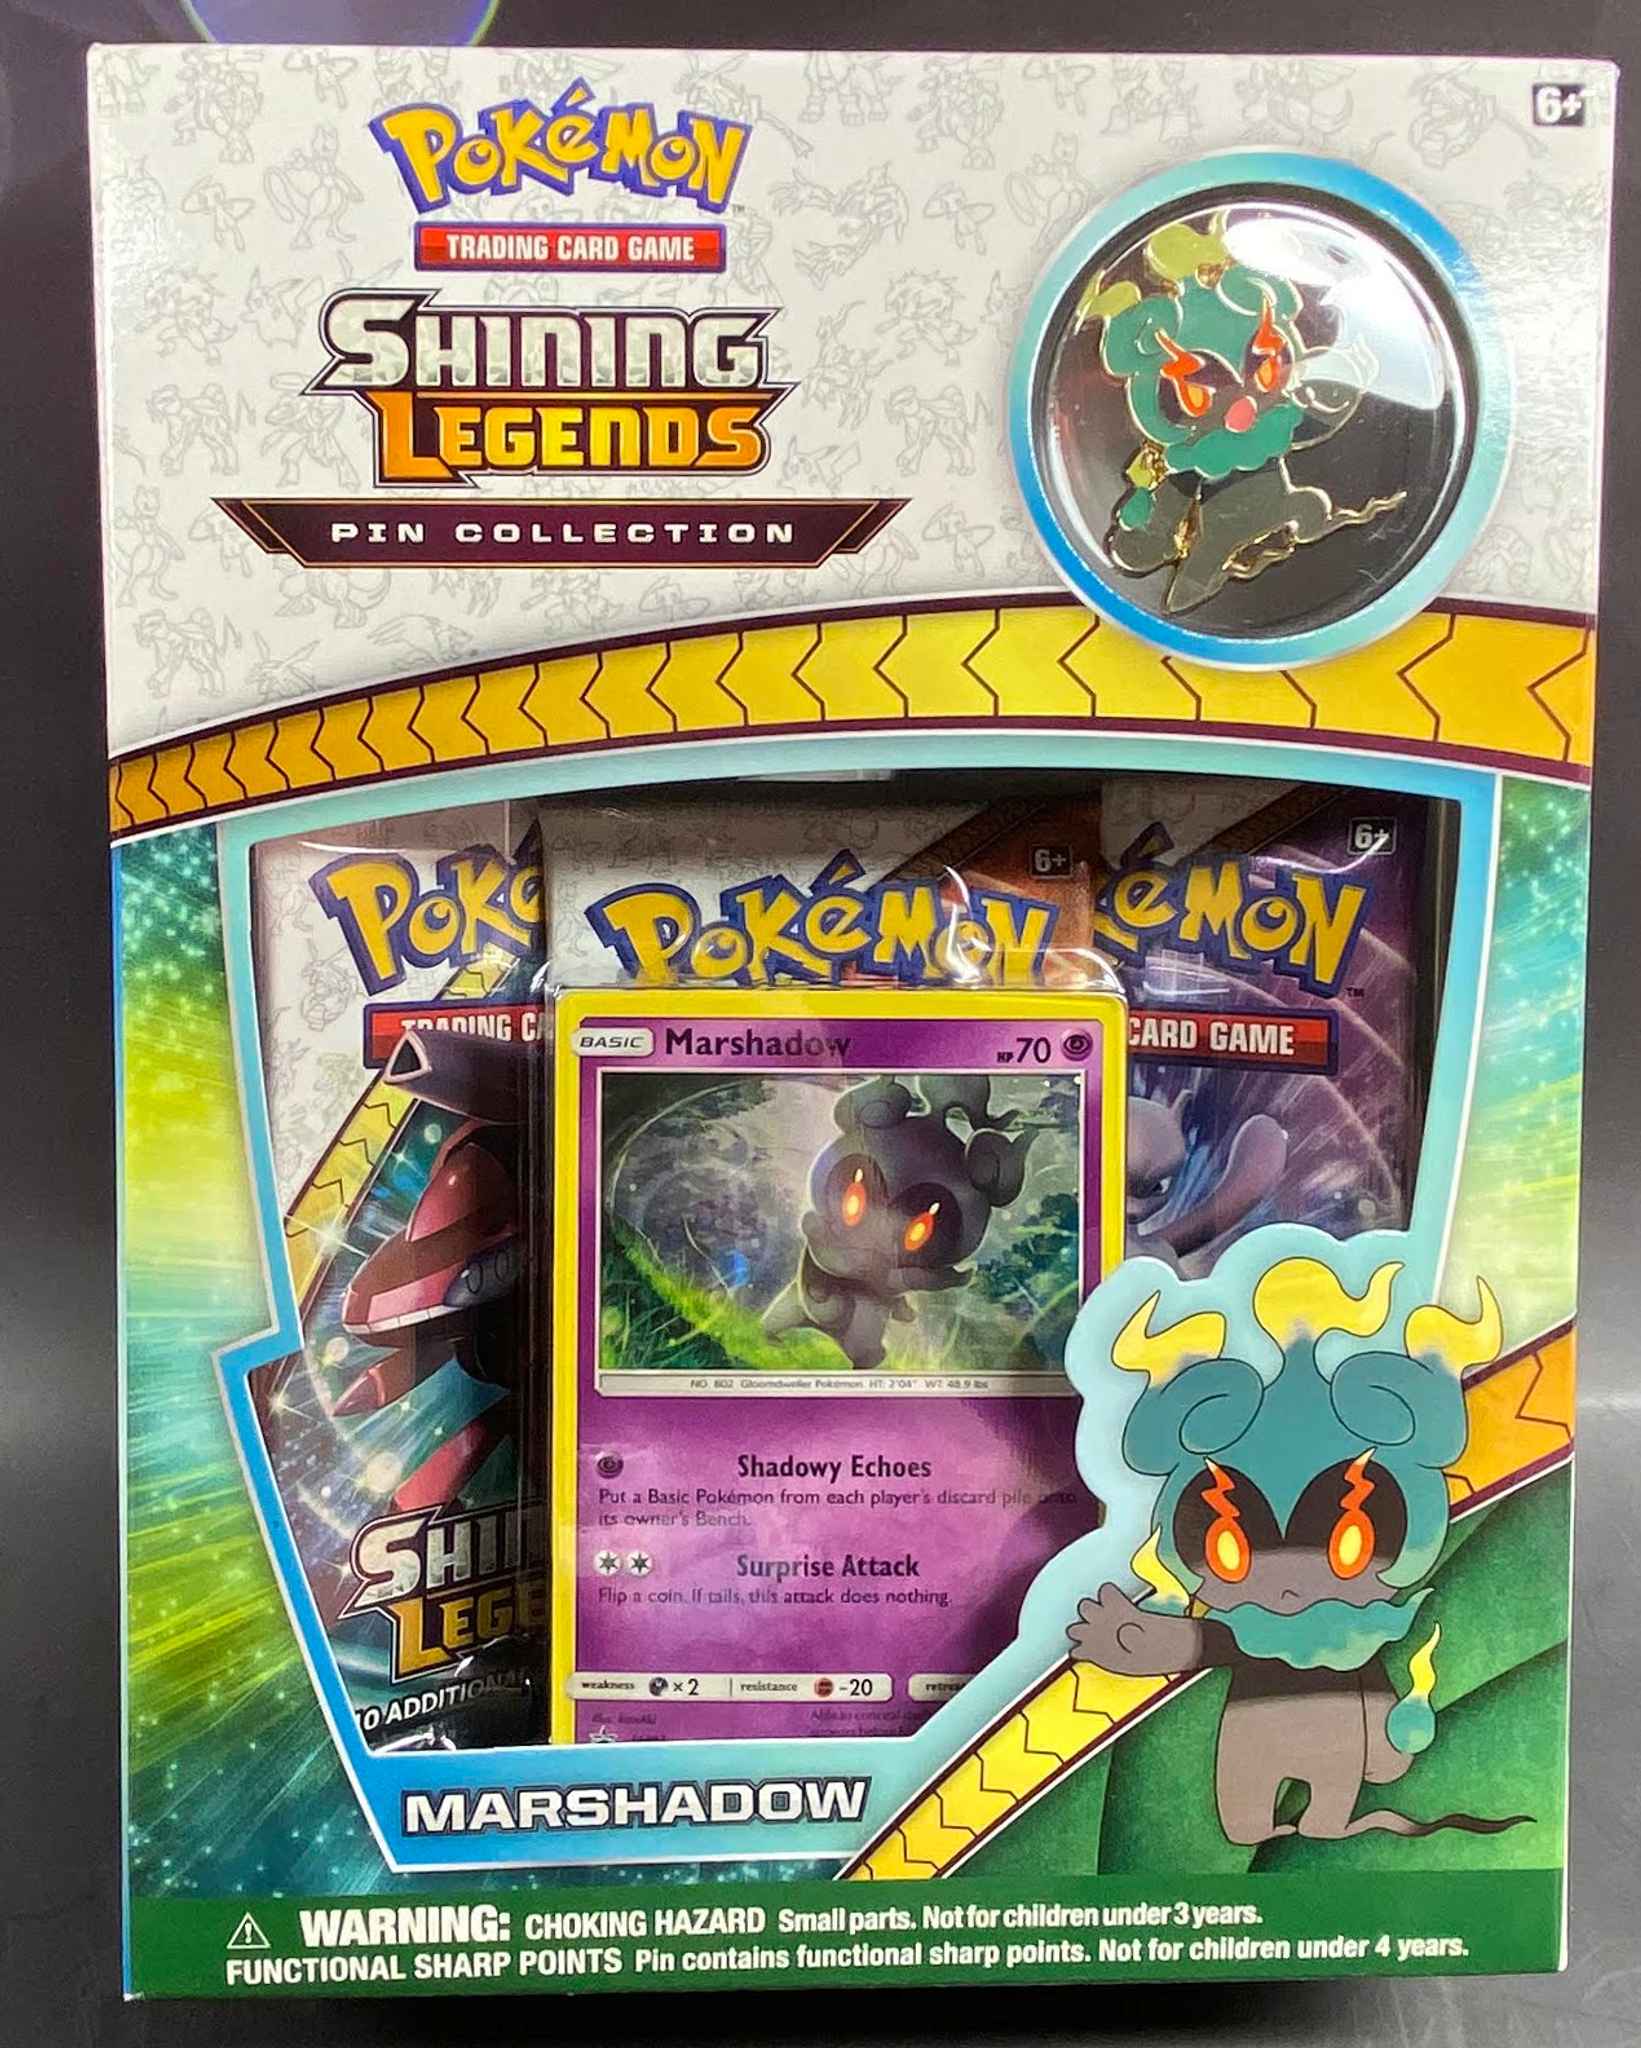 New Factory Sealed Pokemon Shining Legends Pin Collection Marshadow Box 